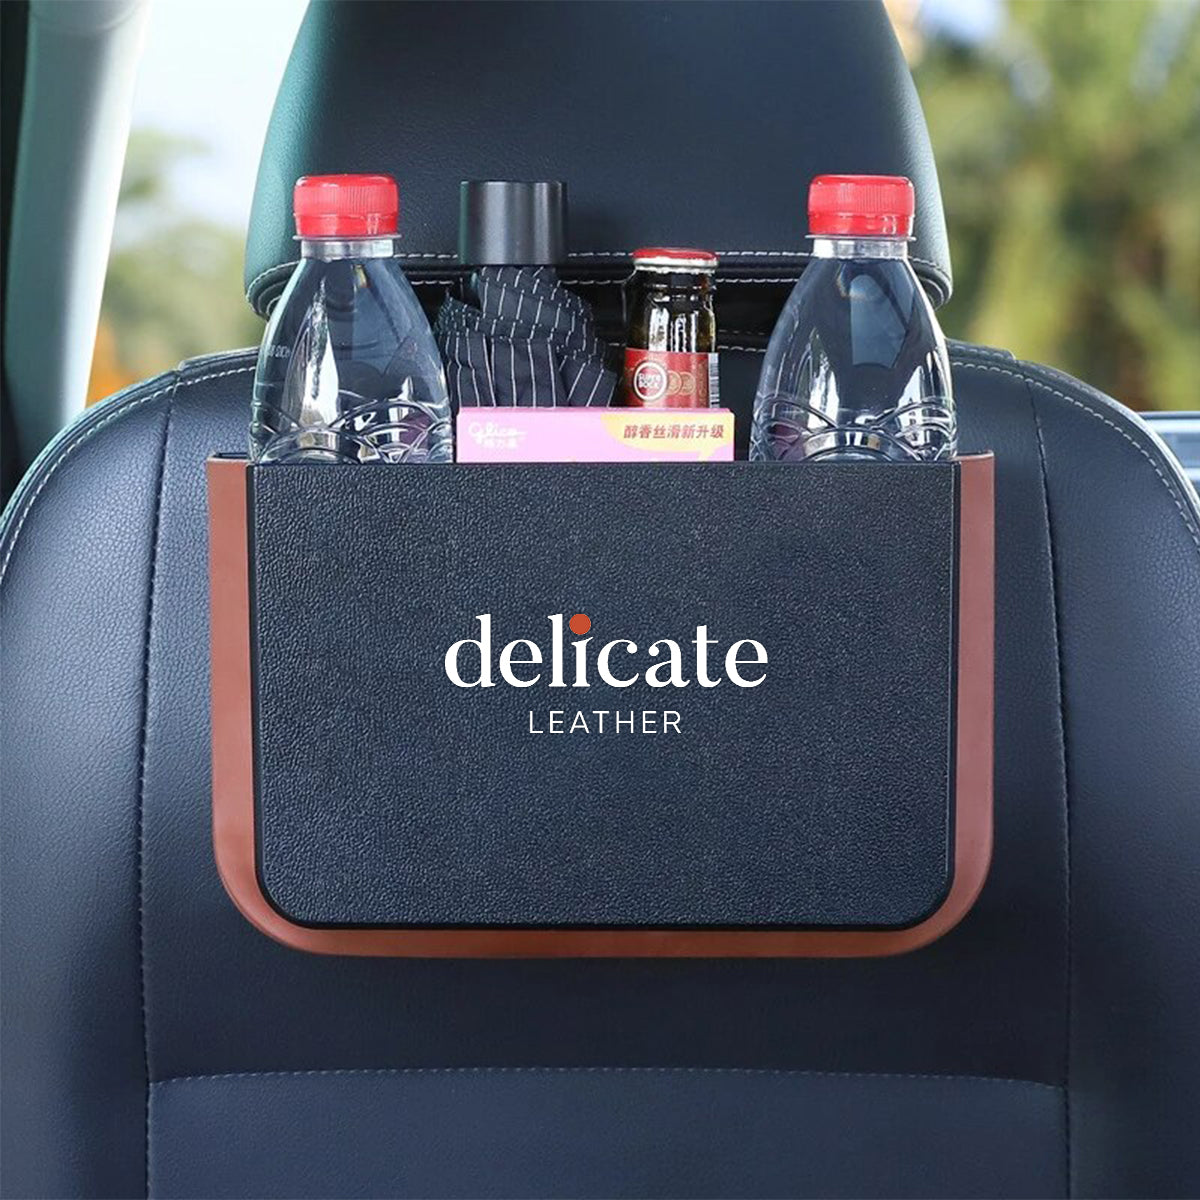 Delicate Leather Hanging Waterproof Car Trash can-Foldable, Custom For Your Cars, Waterproof, and Equipped with Cup Holders and Trays. Multi-Purpose, Car Accessories CC11992 - Delicate Leather